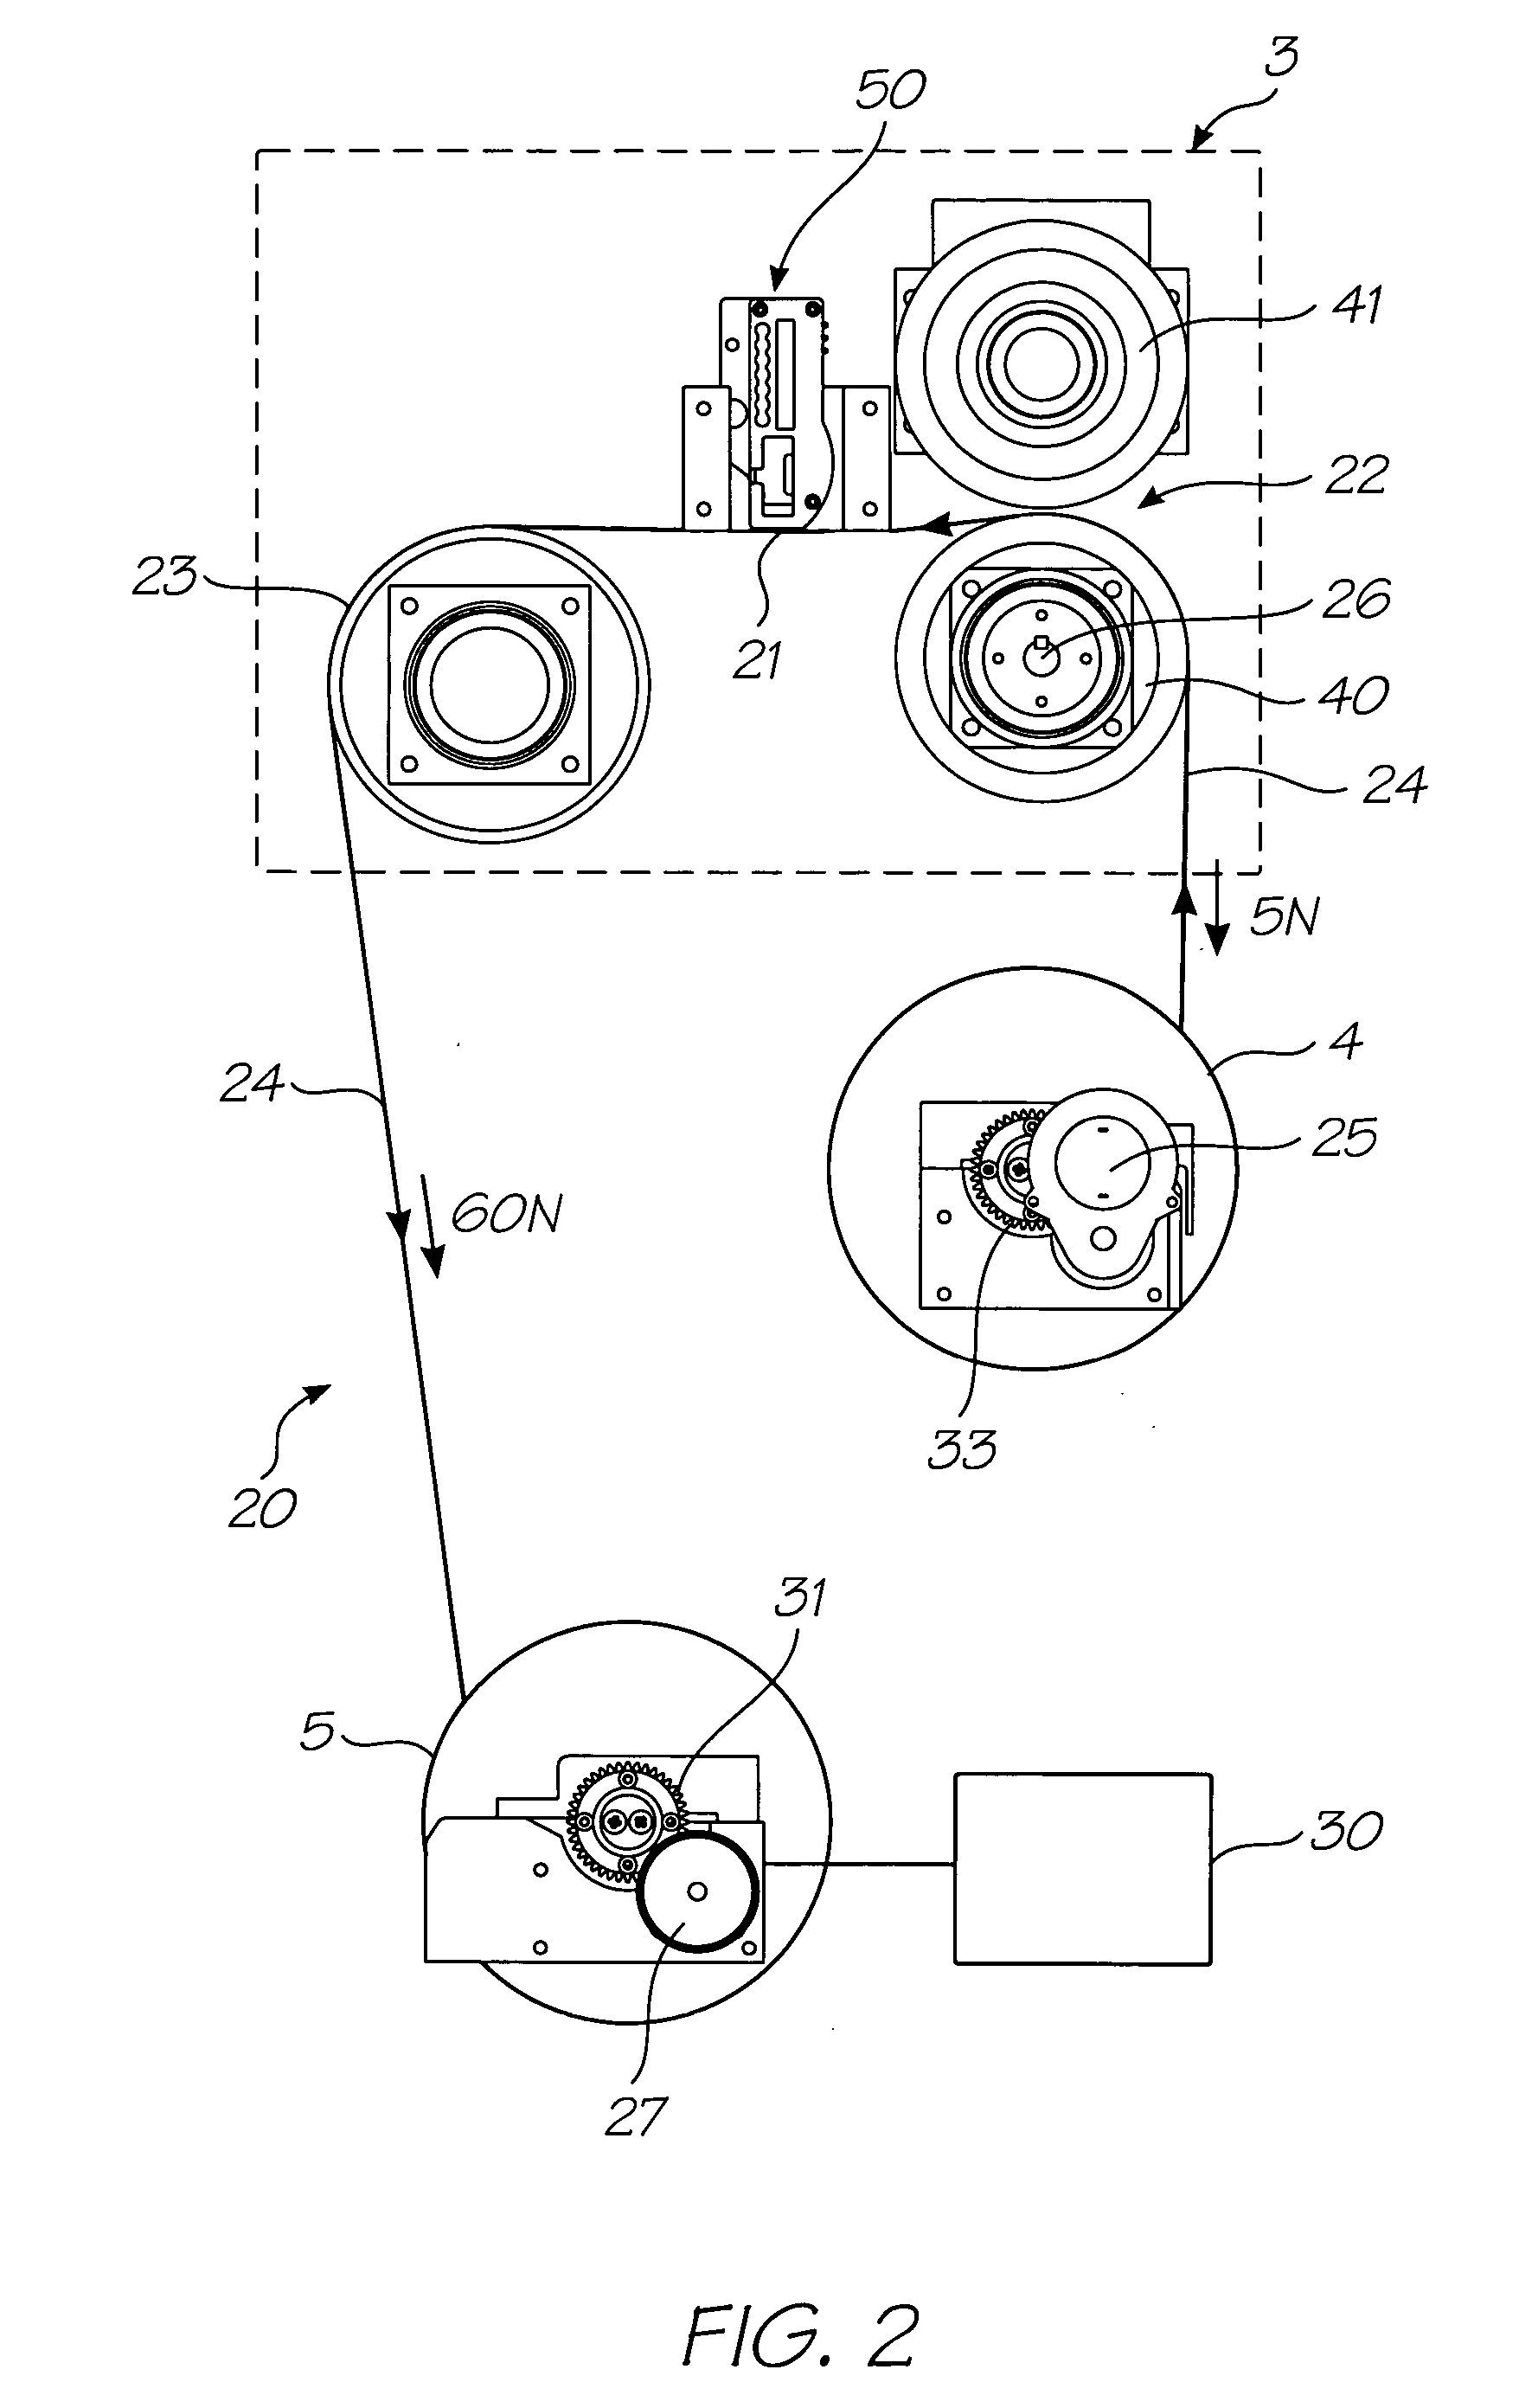 Feed mechanism for maintaining constant web tension in a wide format printer